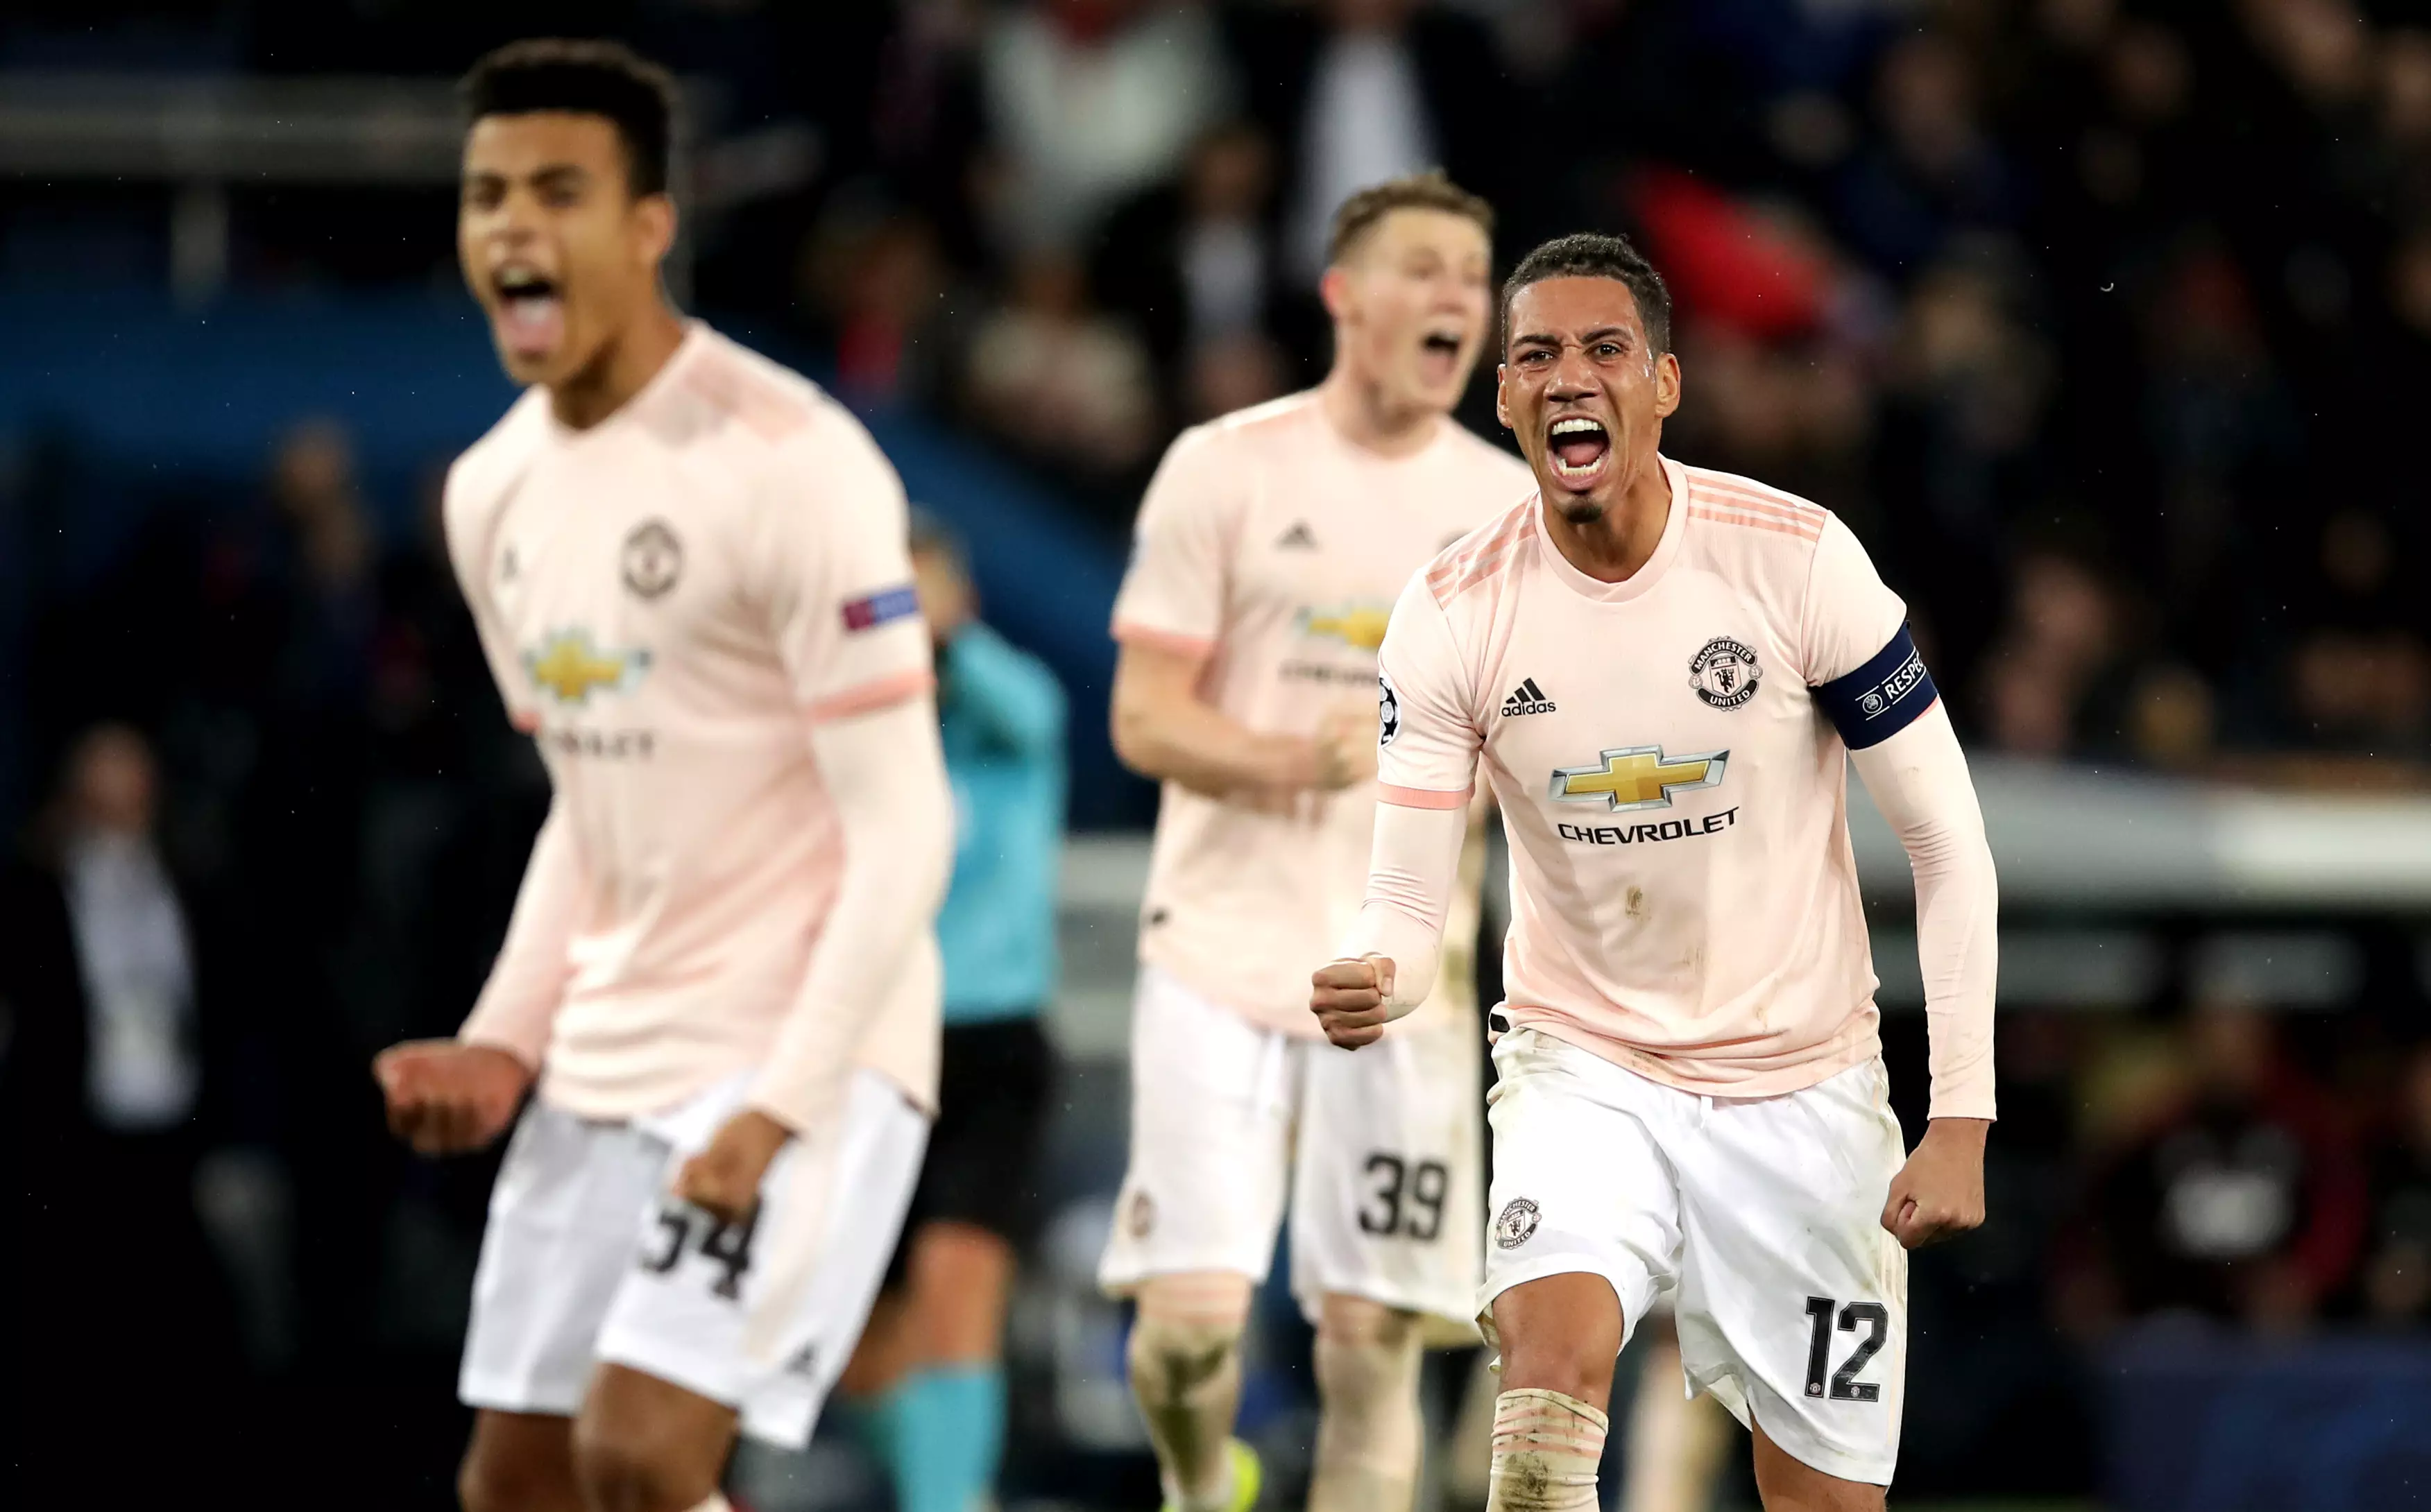 Chris Smalling has been much improved under Ole Gunnar Solskjaer. Image: PA Images